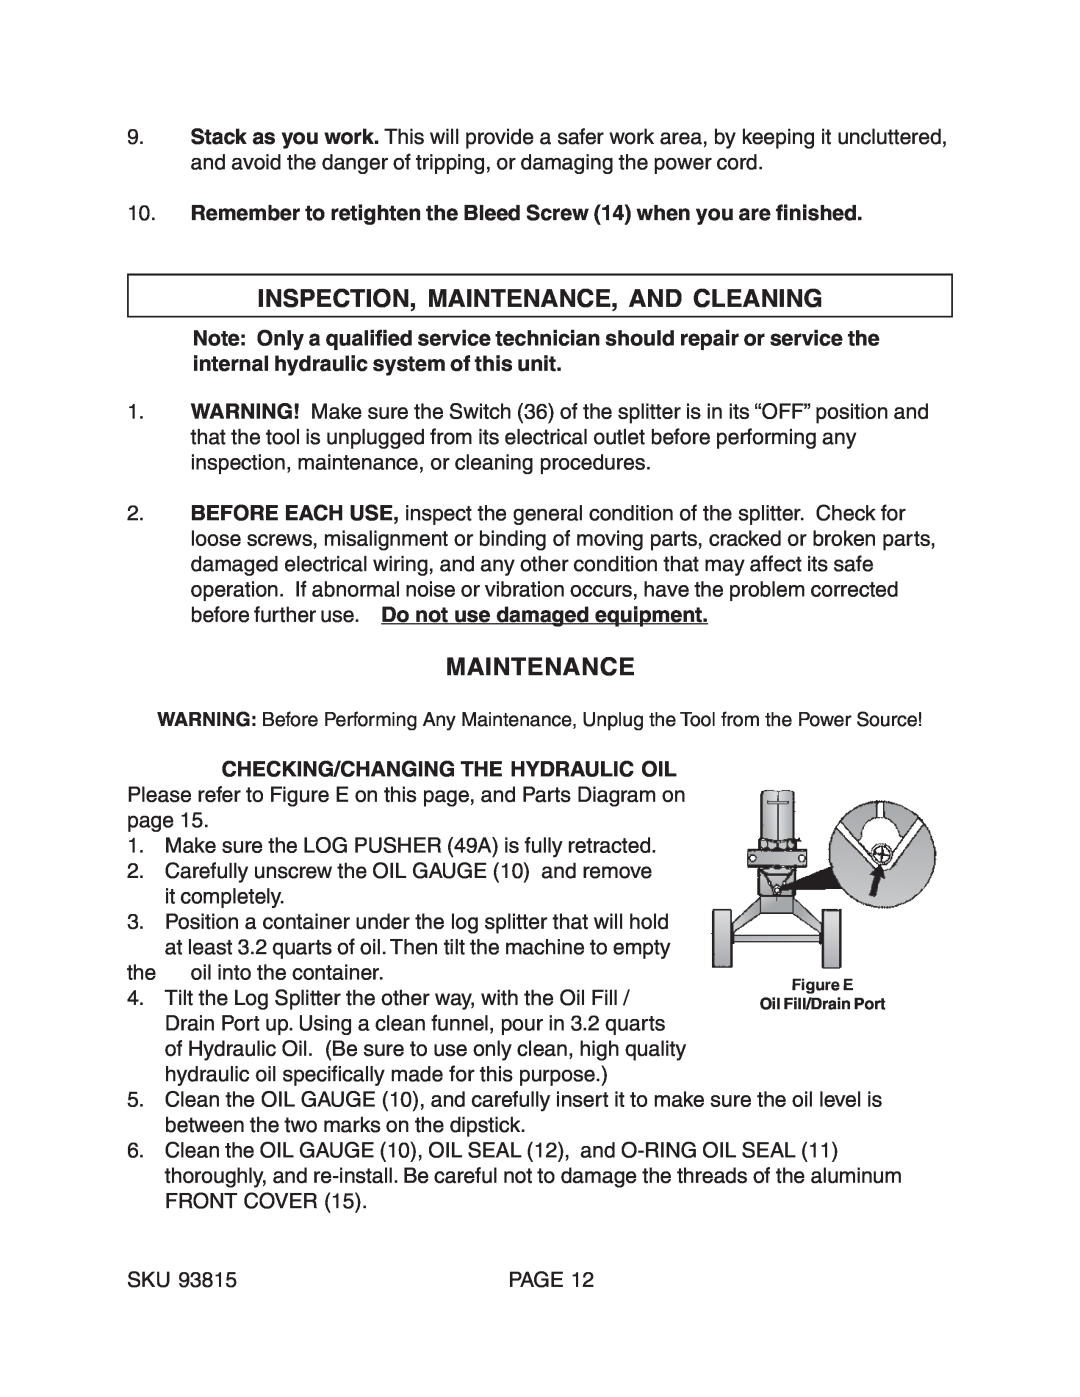 Harbor Freight Tools 93815 manual Inspection, Maintenance, And Cleaning 